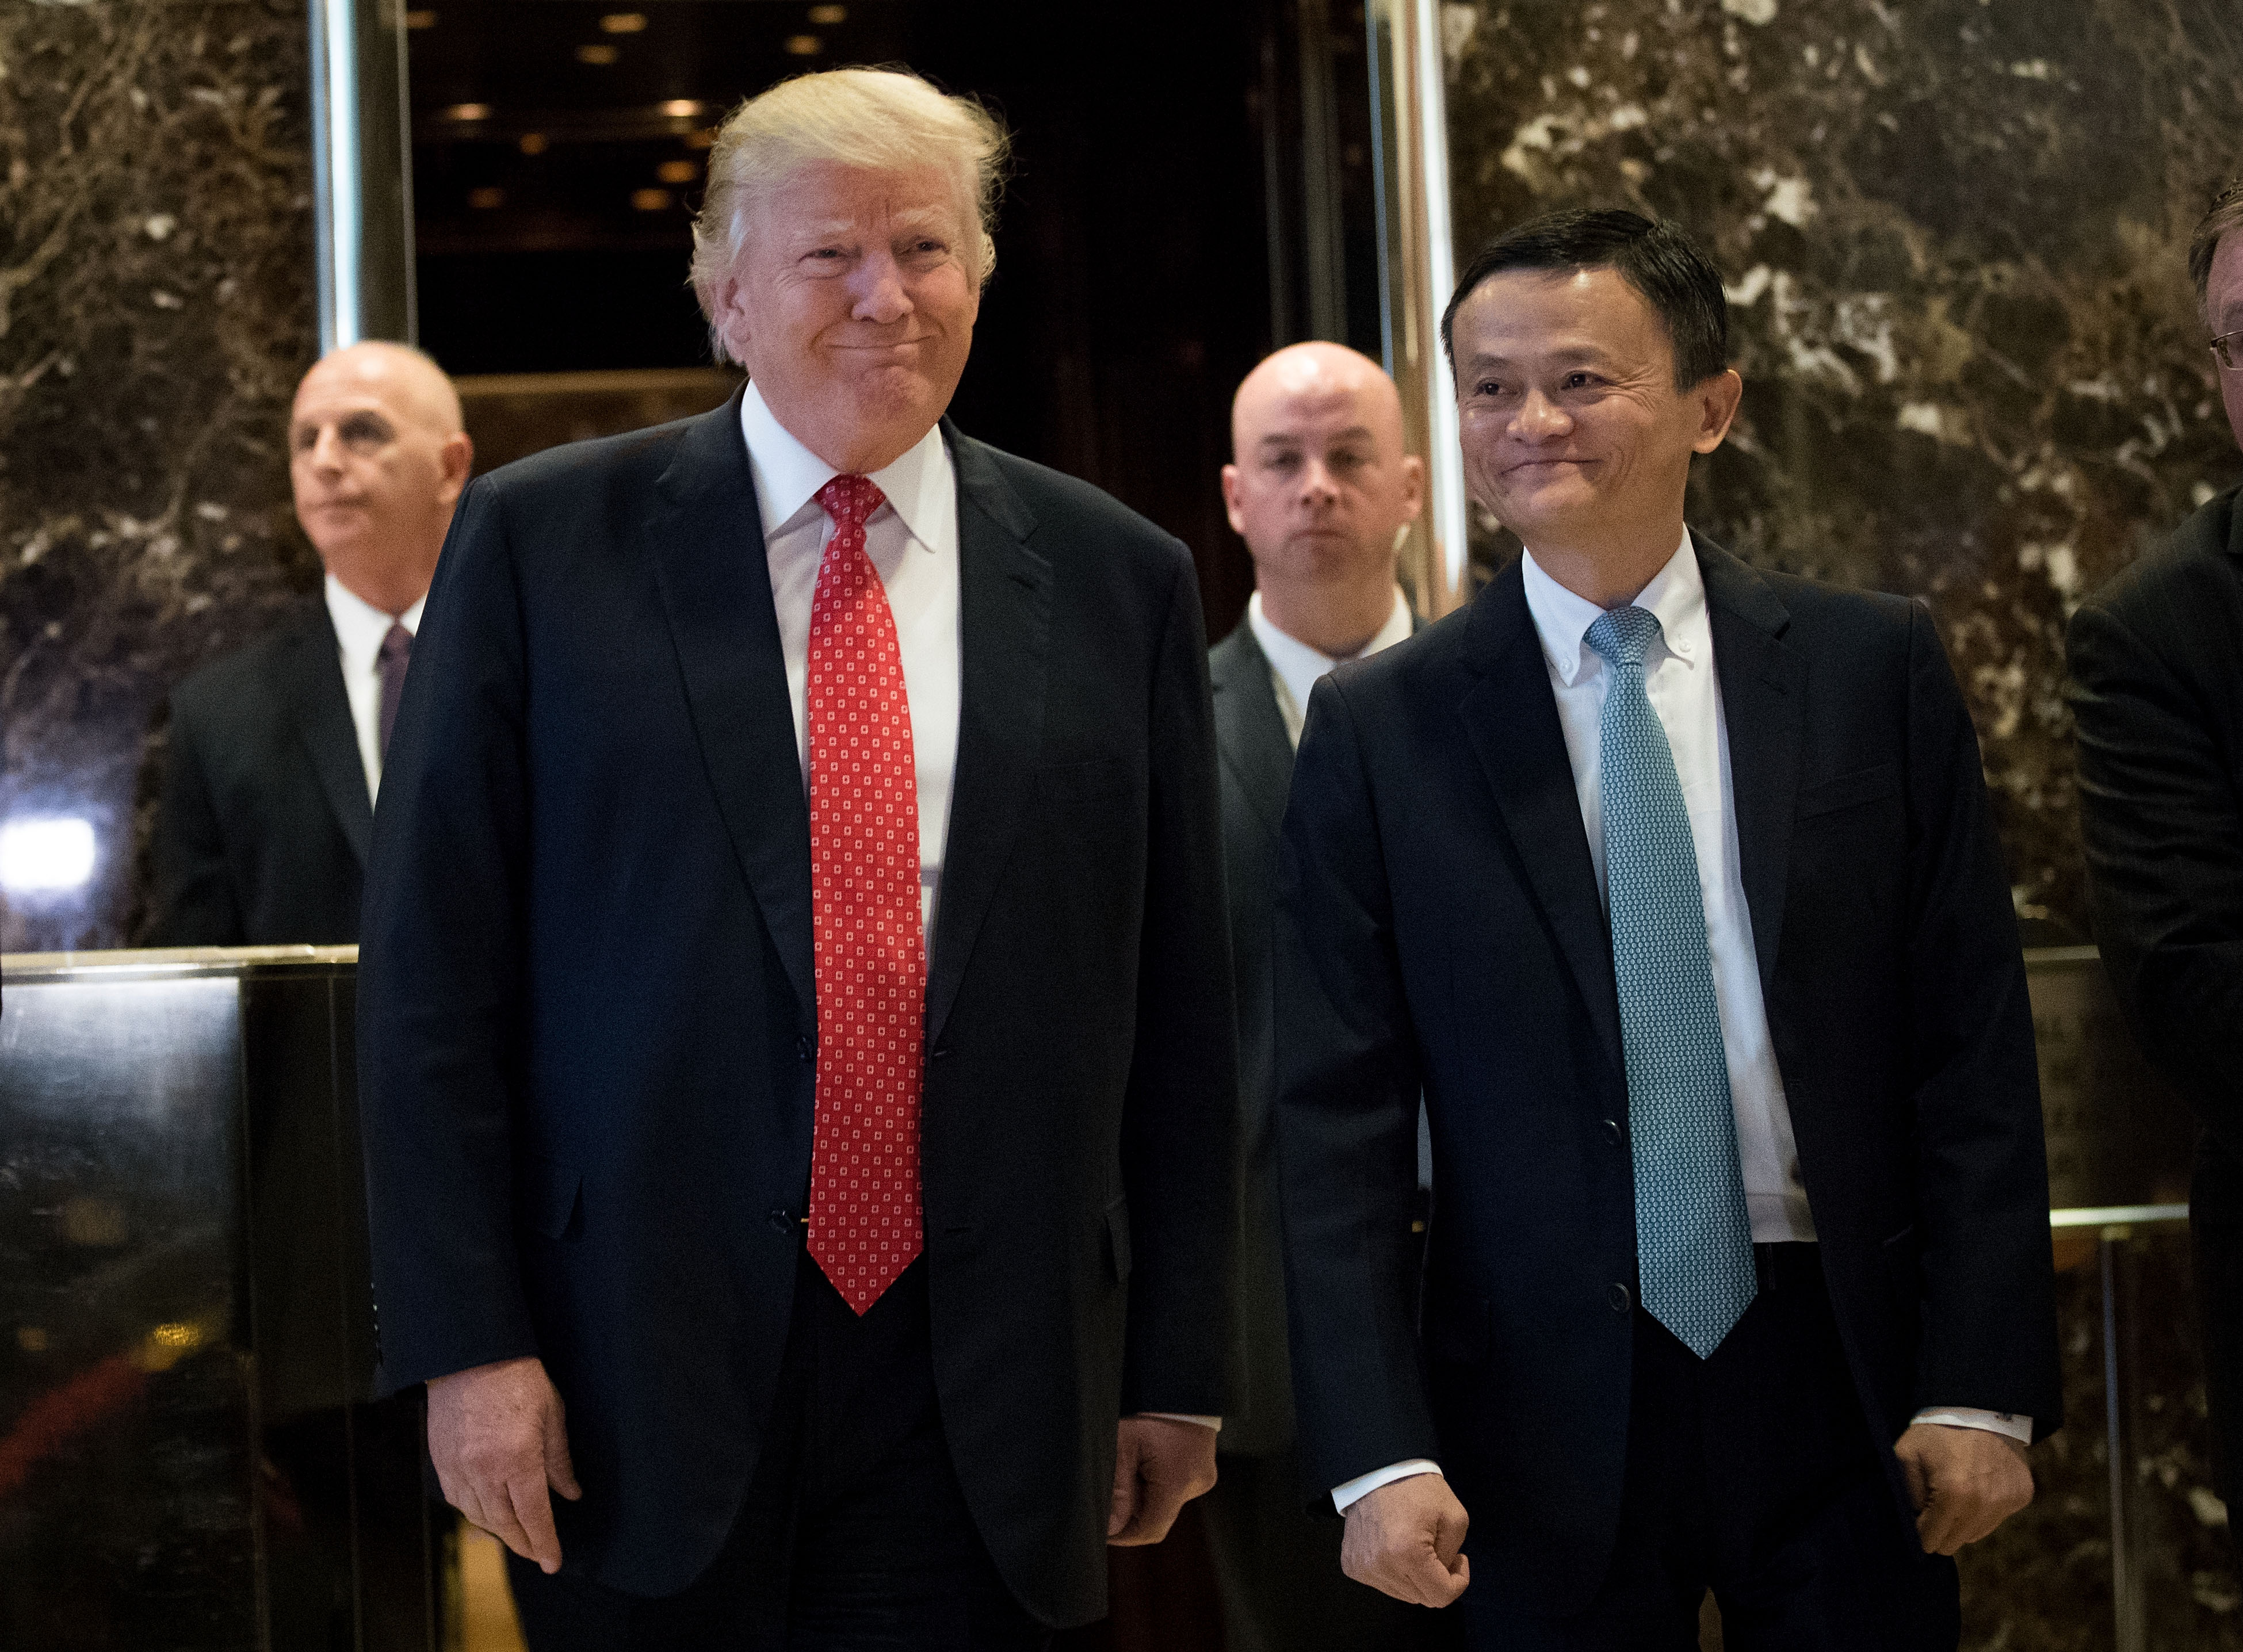 Jack Ma next to U.S. President Donald Trump after a meeting at Trump Tower in New York City | Photo: Getty Images